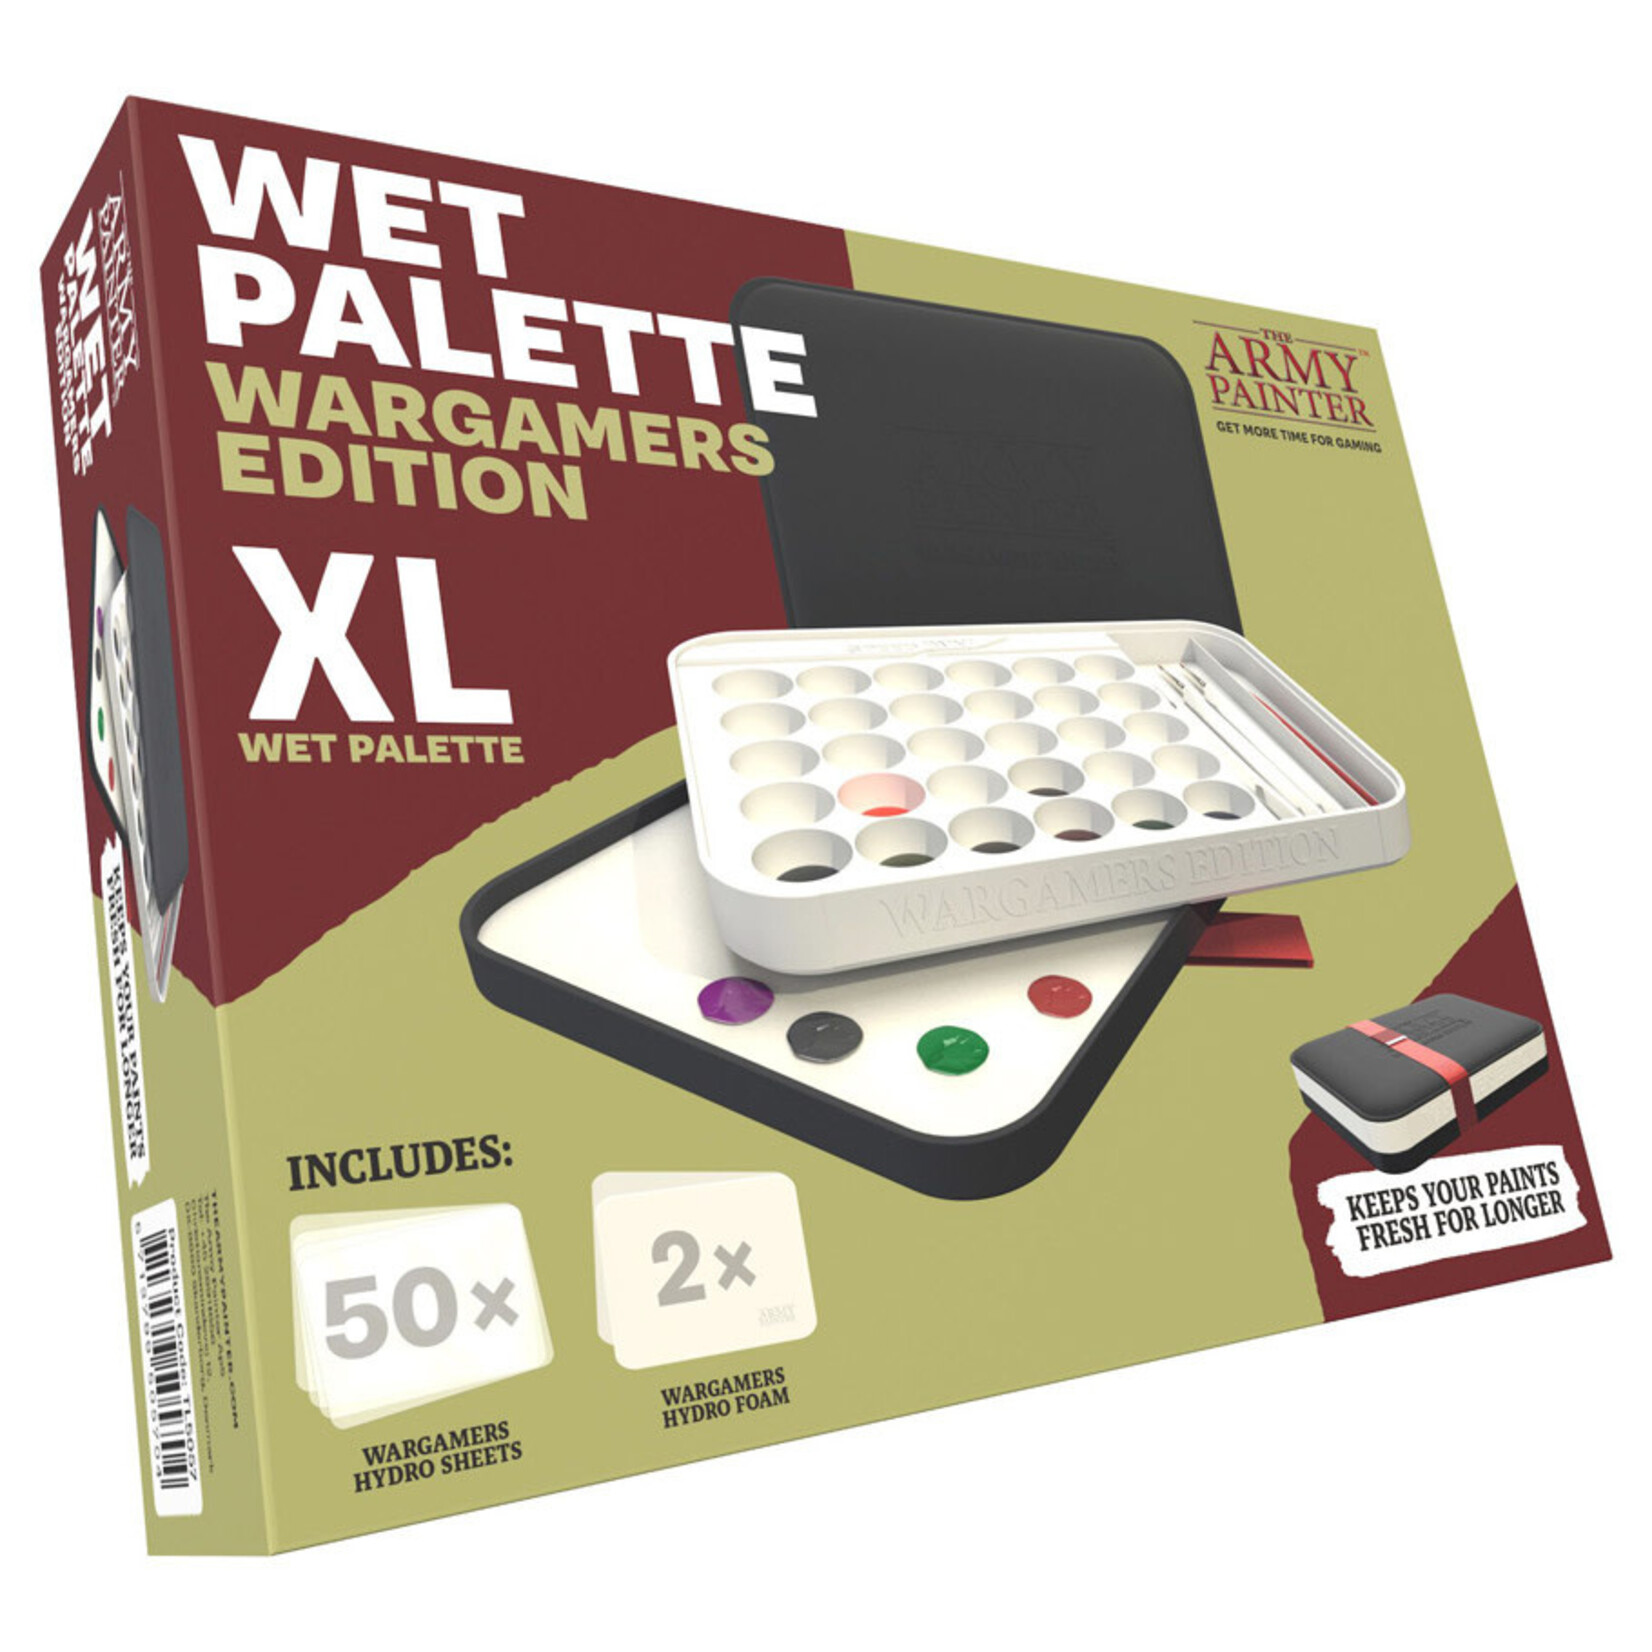 The Army Painter Wet Palette: Wargamers Edition XL